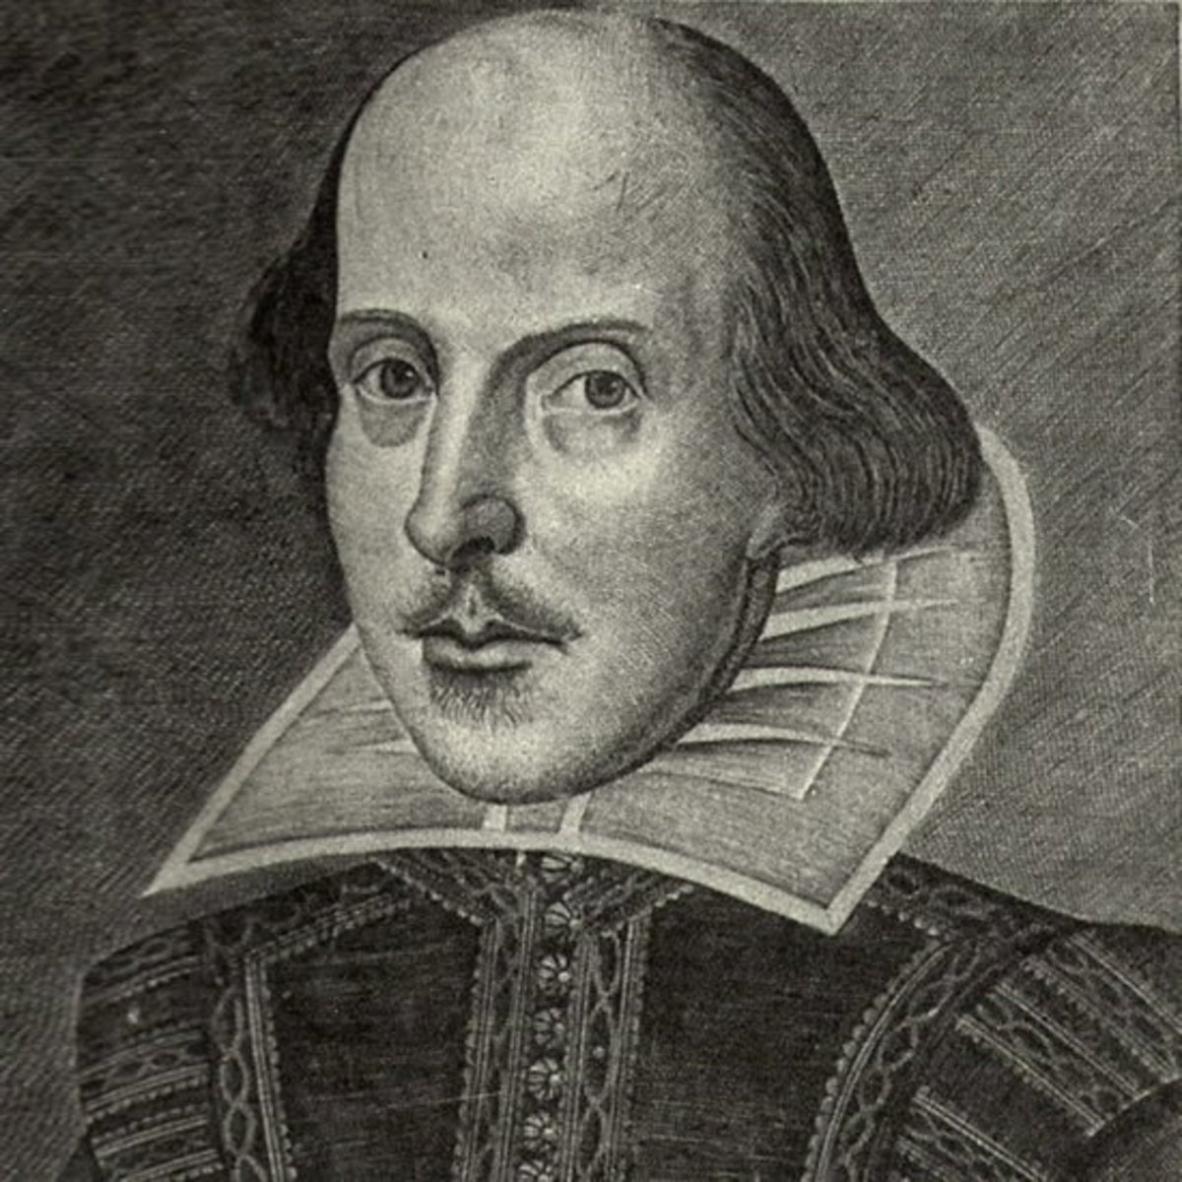 What Are the Most Important Adaptations and Interpretations of William Shakespeare's Plays?